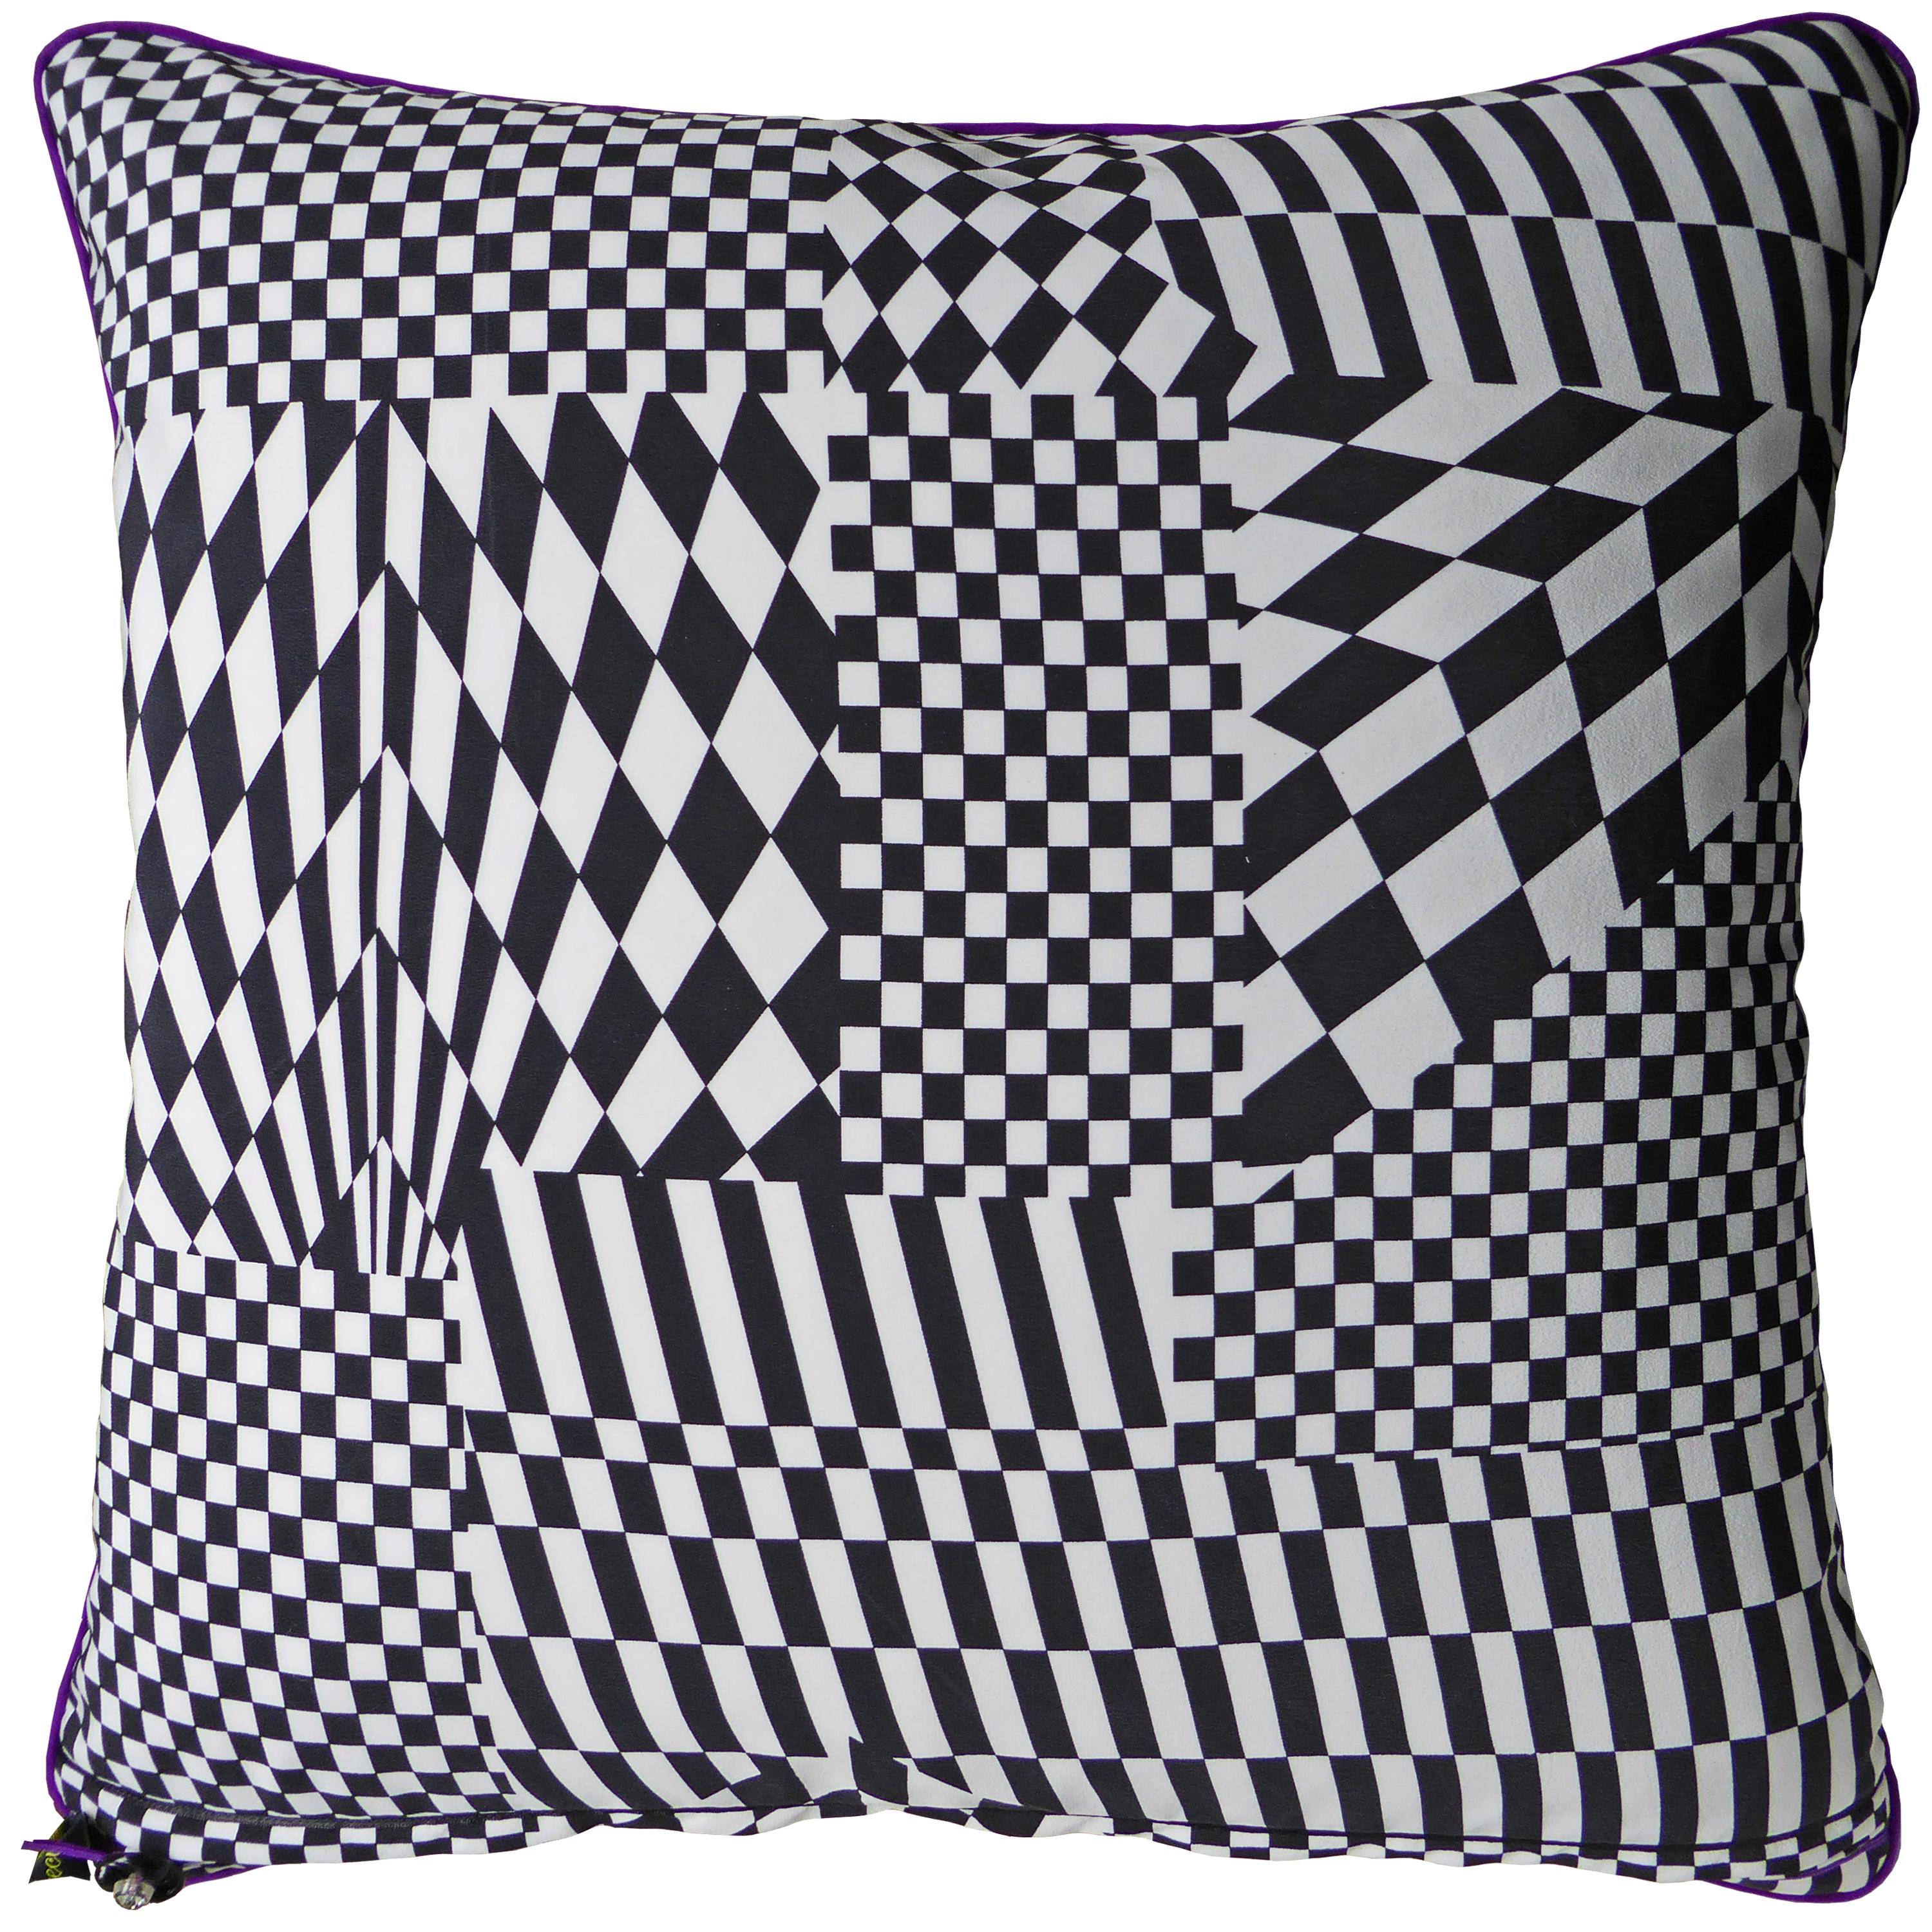 Boogie Woogie
circa - 1960-1970
British bespoke-made luxury cushion created by using original vintage silks with two beautiful and complimentary mis-match sides; The front features a fifties ‘Boogie Woogie’ dance theme combined with a geometric